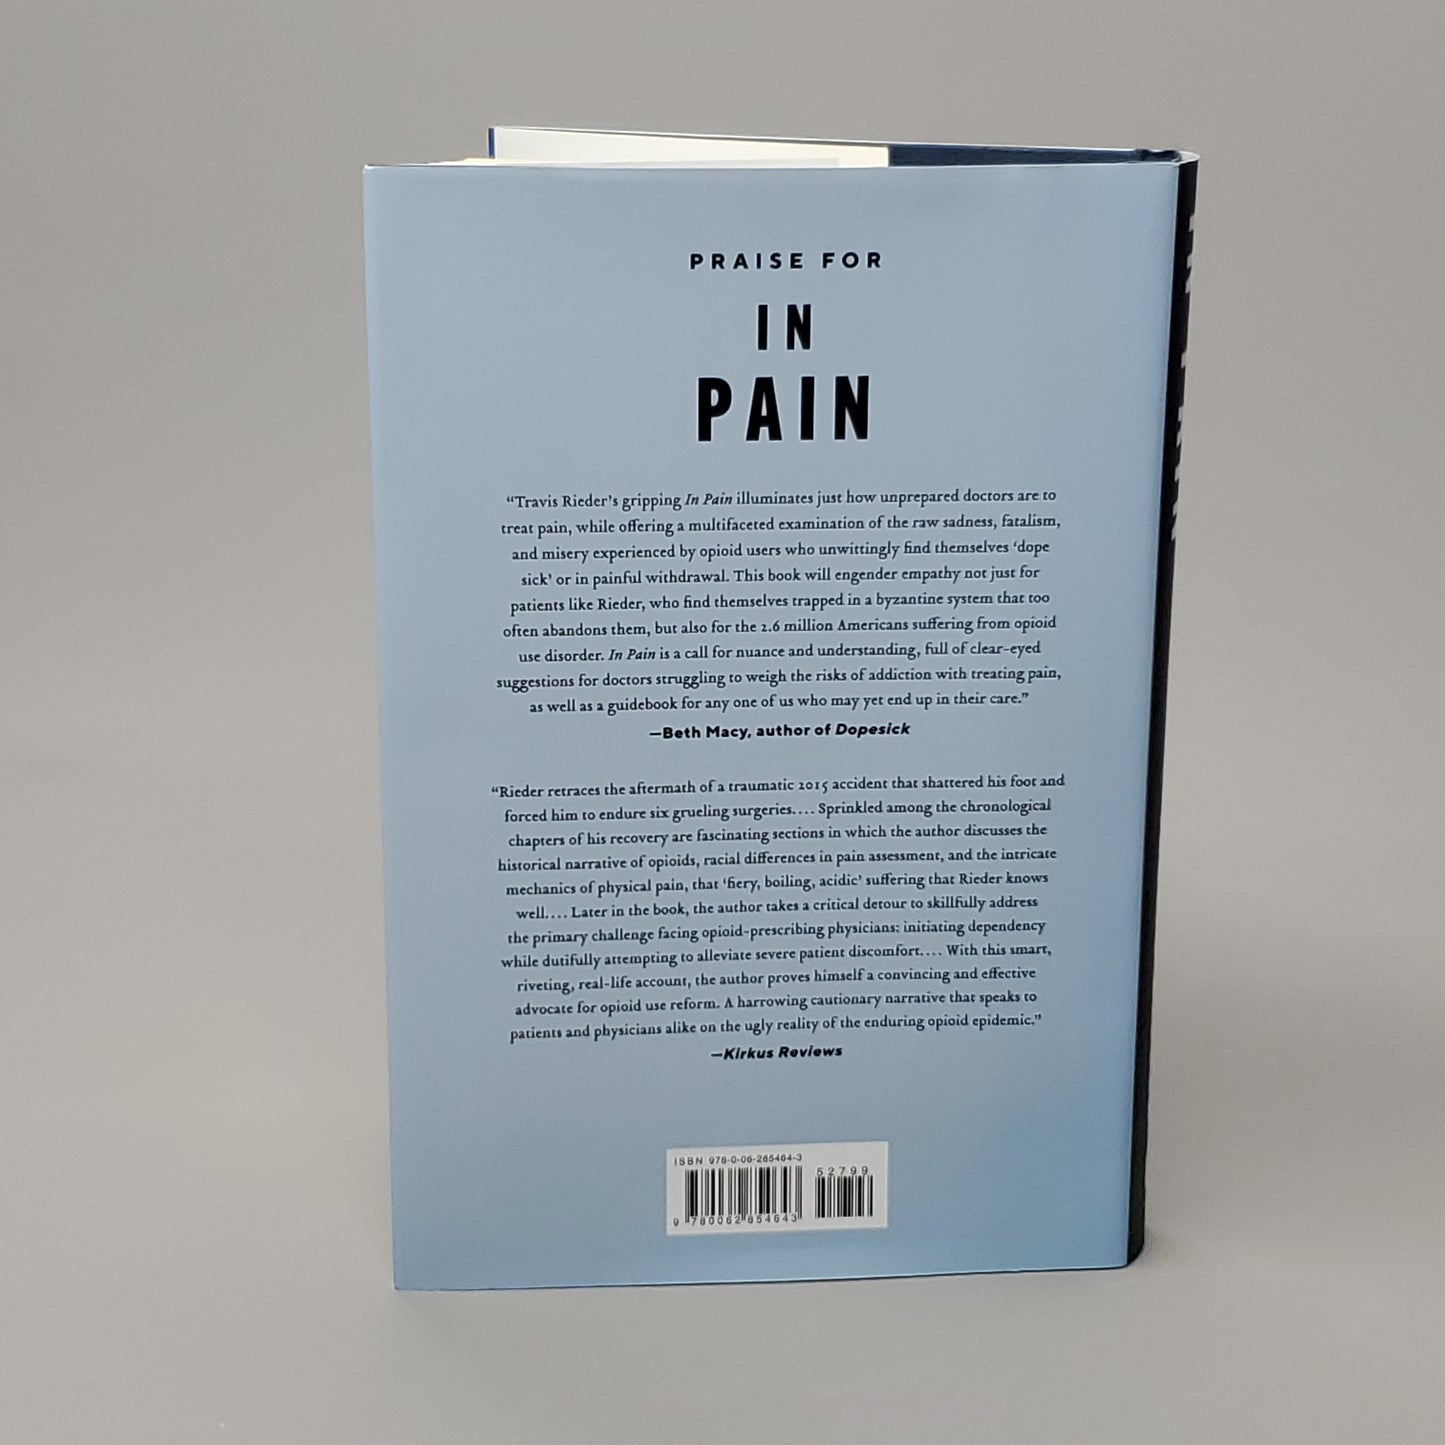 IN PAIN A Bioethicist's Personal Struggle With Opioids by Travis Rieder Book Hardcover (New)